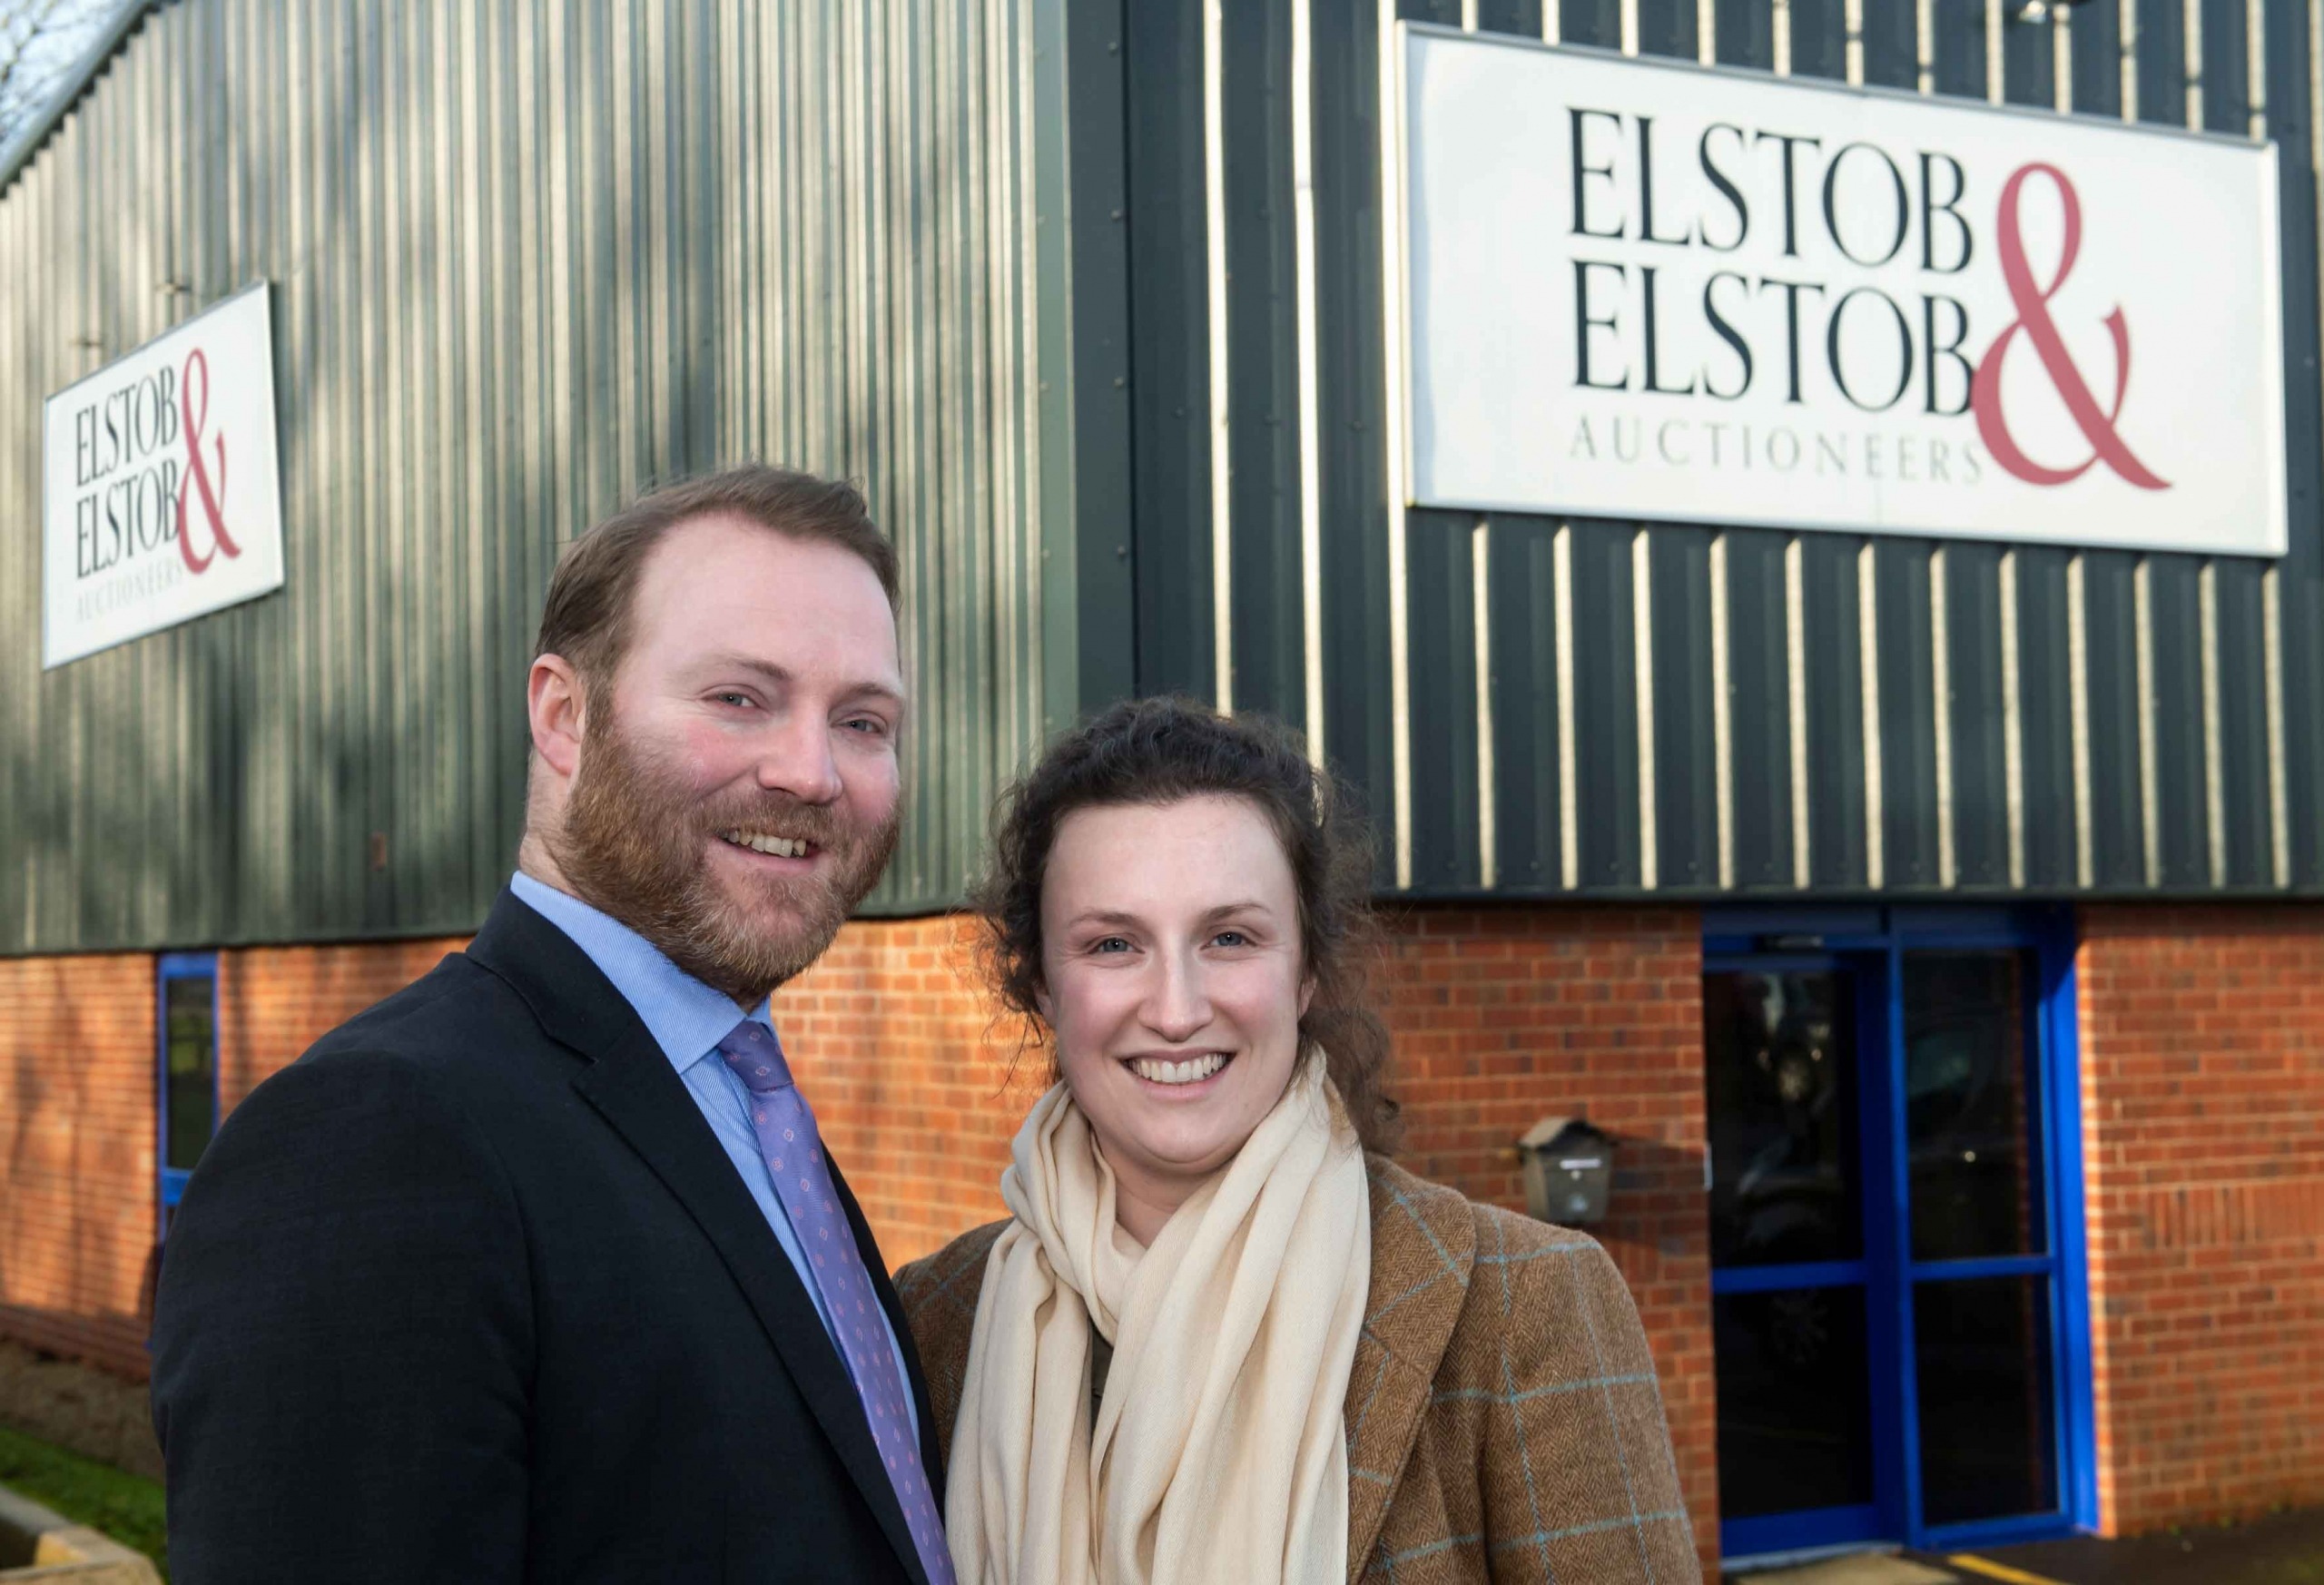 David and Beth Elstob are pictured outside of Elstob & Elstob’s new premises on the Ripon Business Park